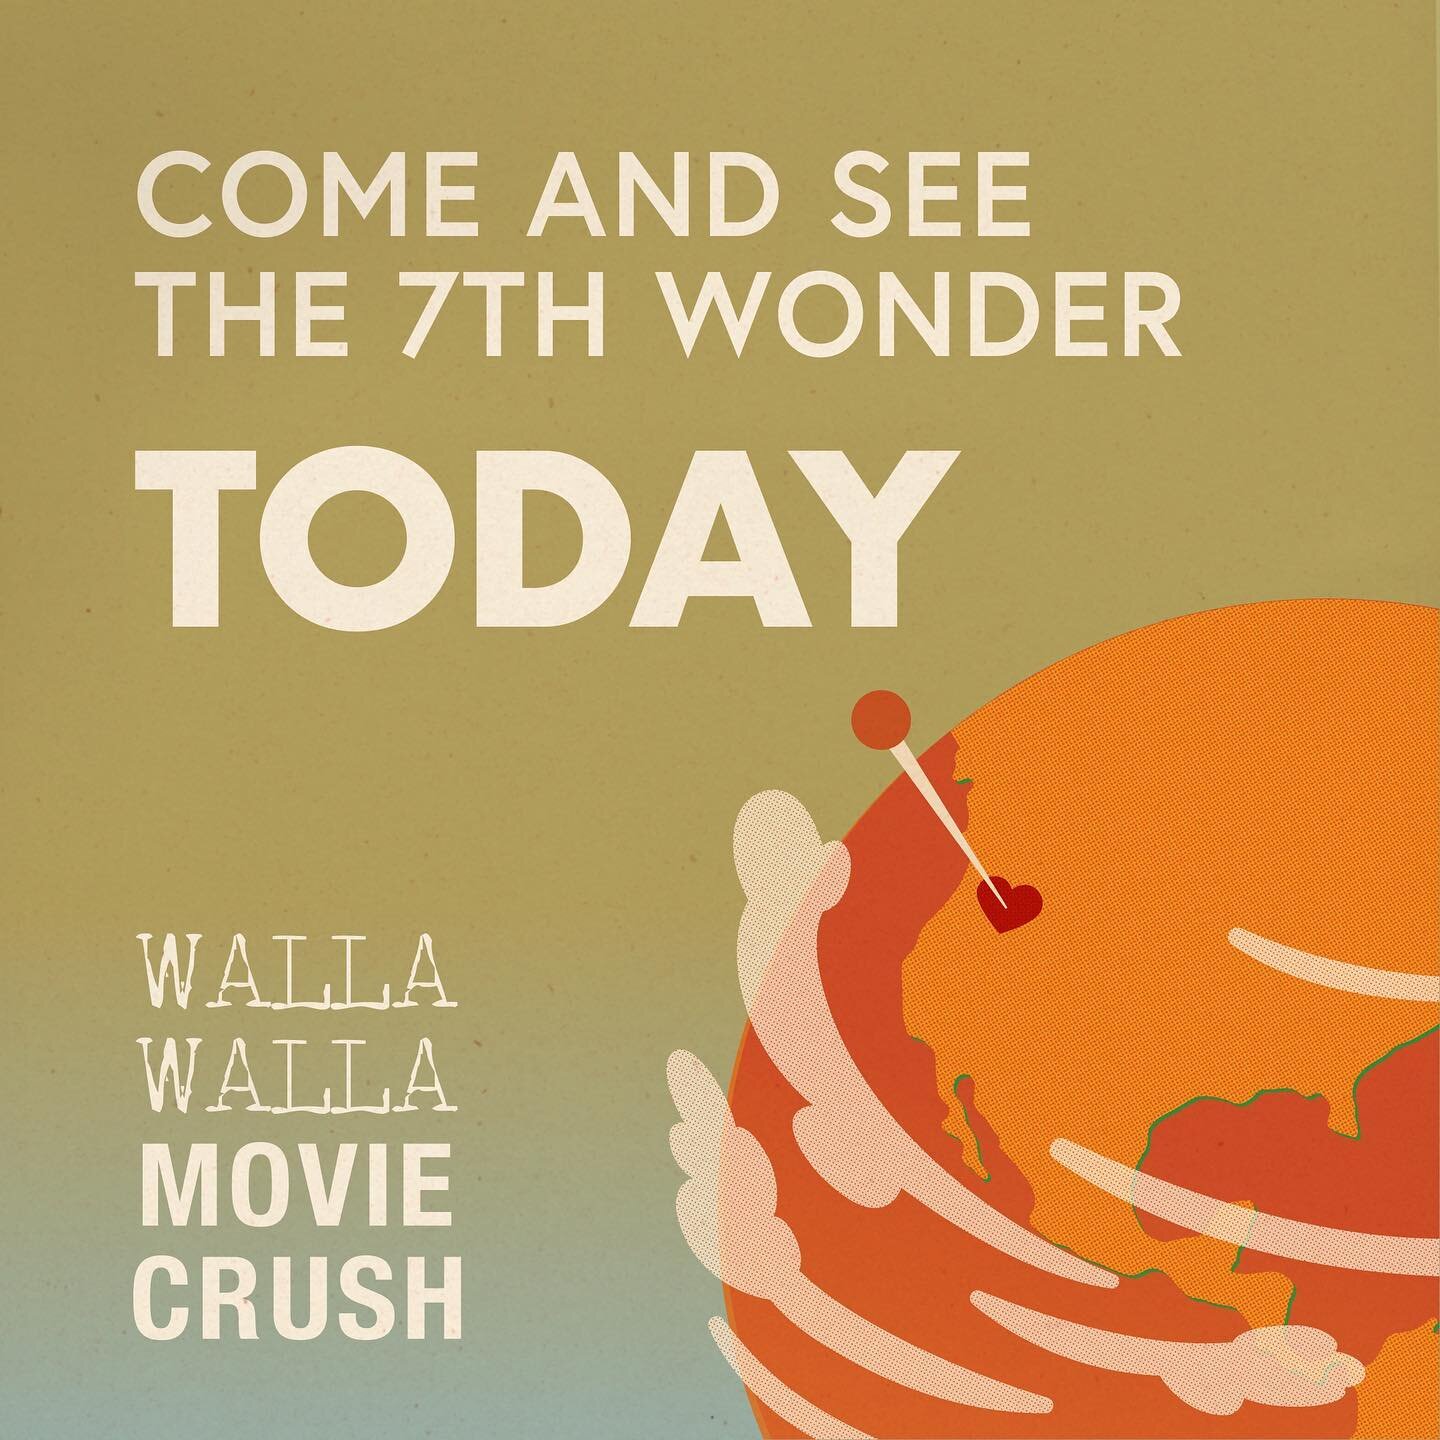 Walla Walla Movie Crush is back, baby! Our first exquisitely curated film block shows TODAY at 6:00 in the incredible @powerhousetheatre. Come indulge yourself&hellip;and you&rsquo;ll see exactly why WWMC is the 7th Wonder of the World!

#CrushFam4ev